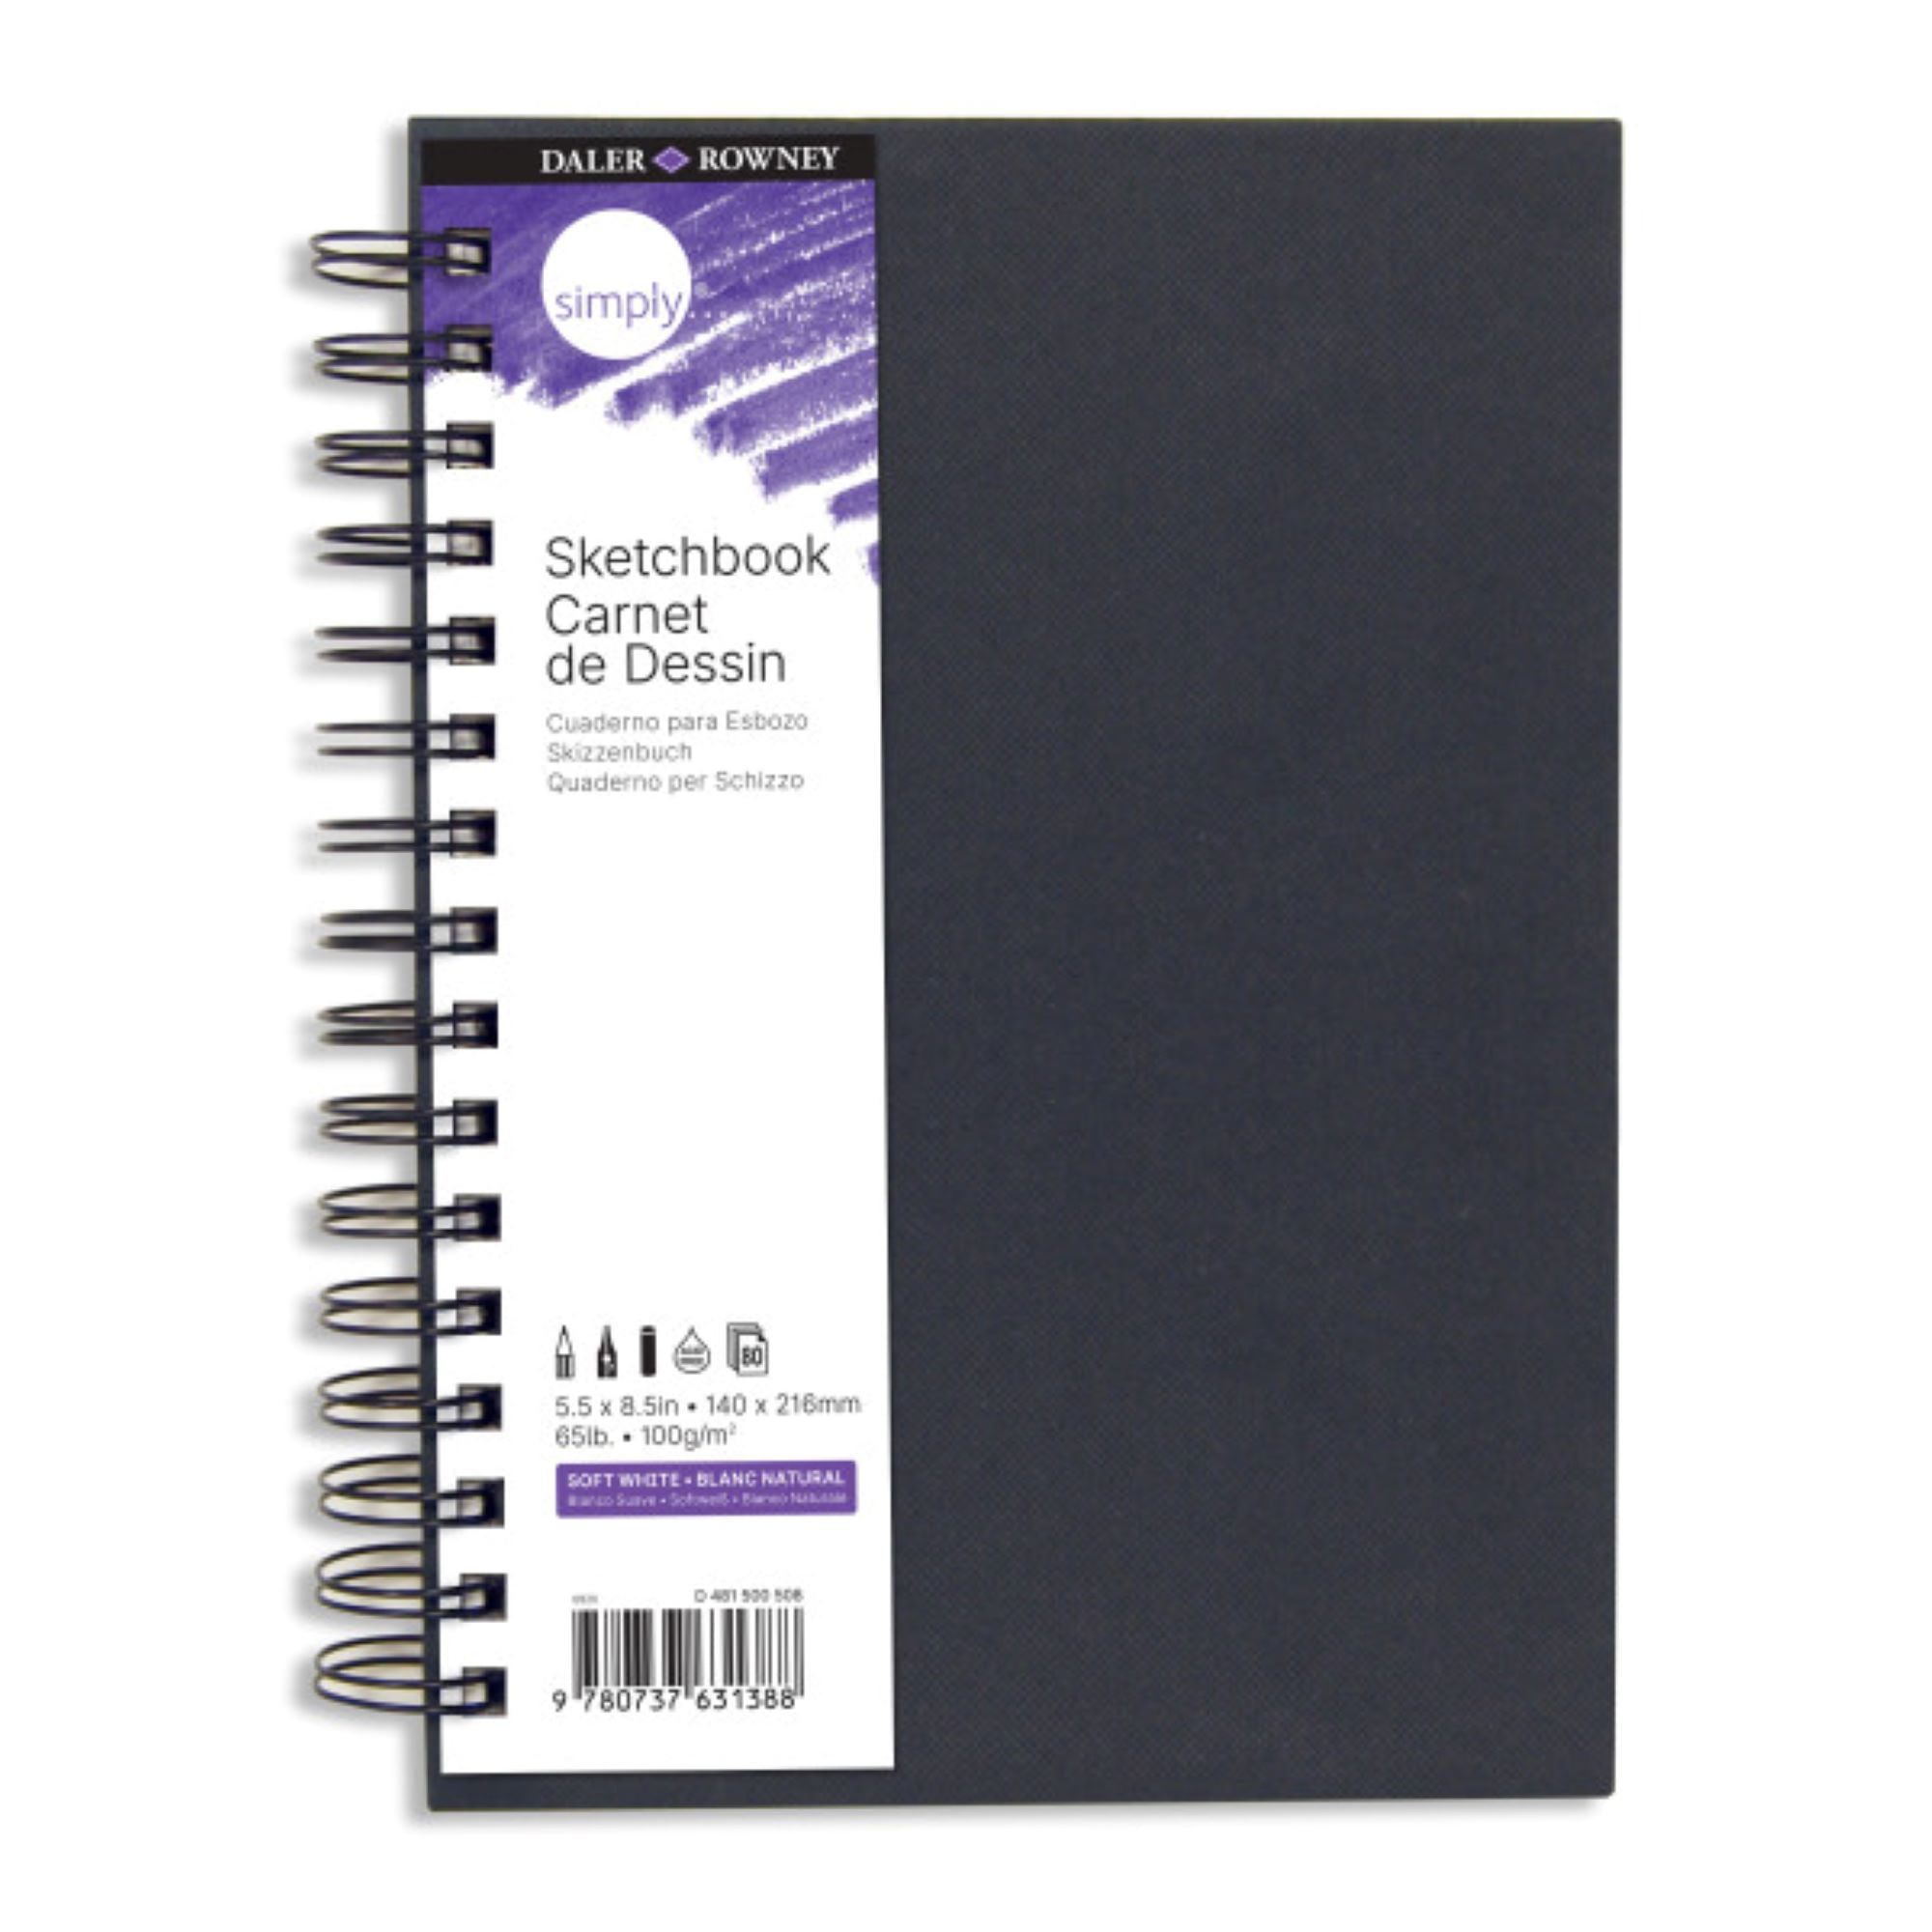 Daler-Rowney Simply Sketch Book, 5.5" x 11" Soft White Pages, 65 Lb, 110 Sheet